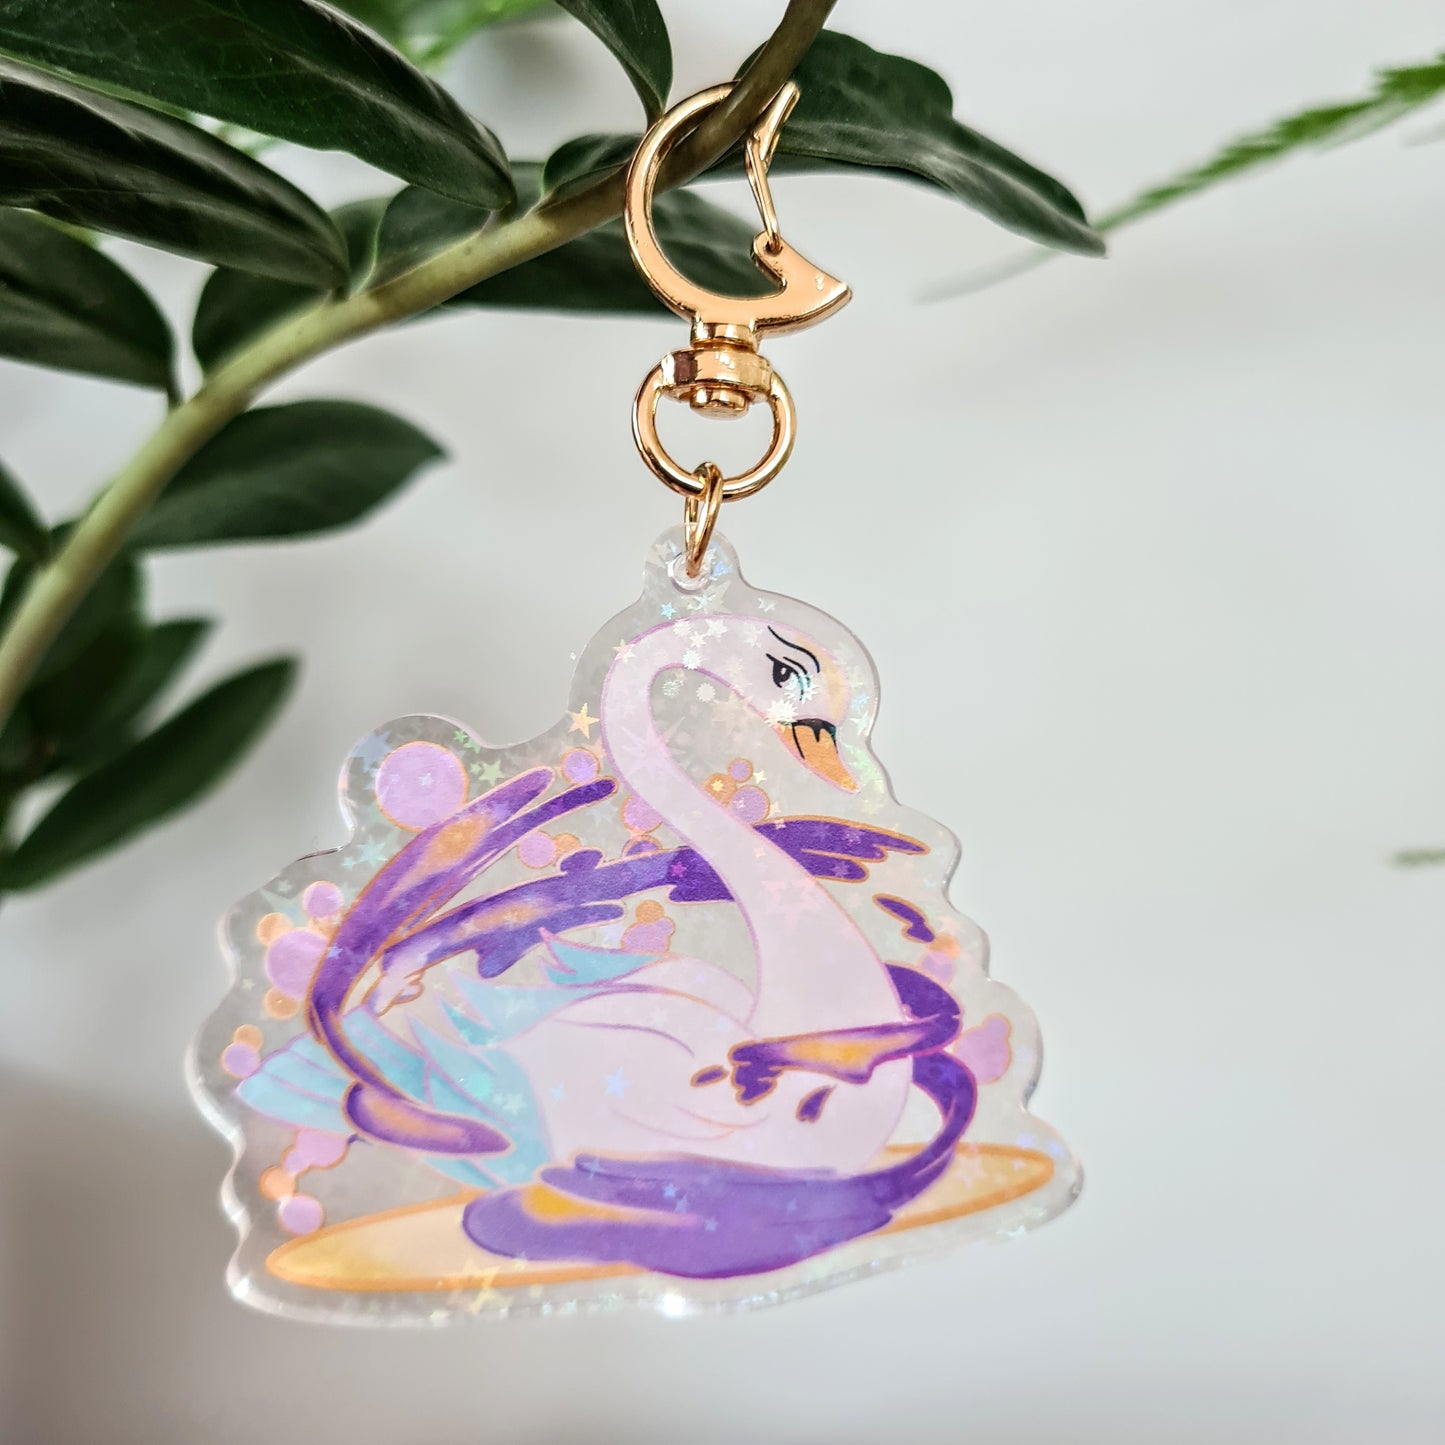 Swan Pin & Accessories